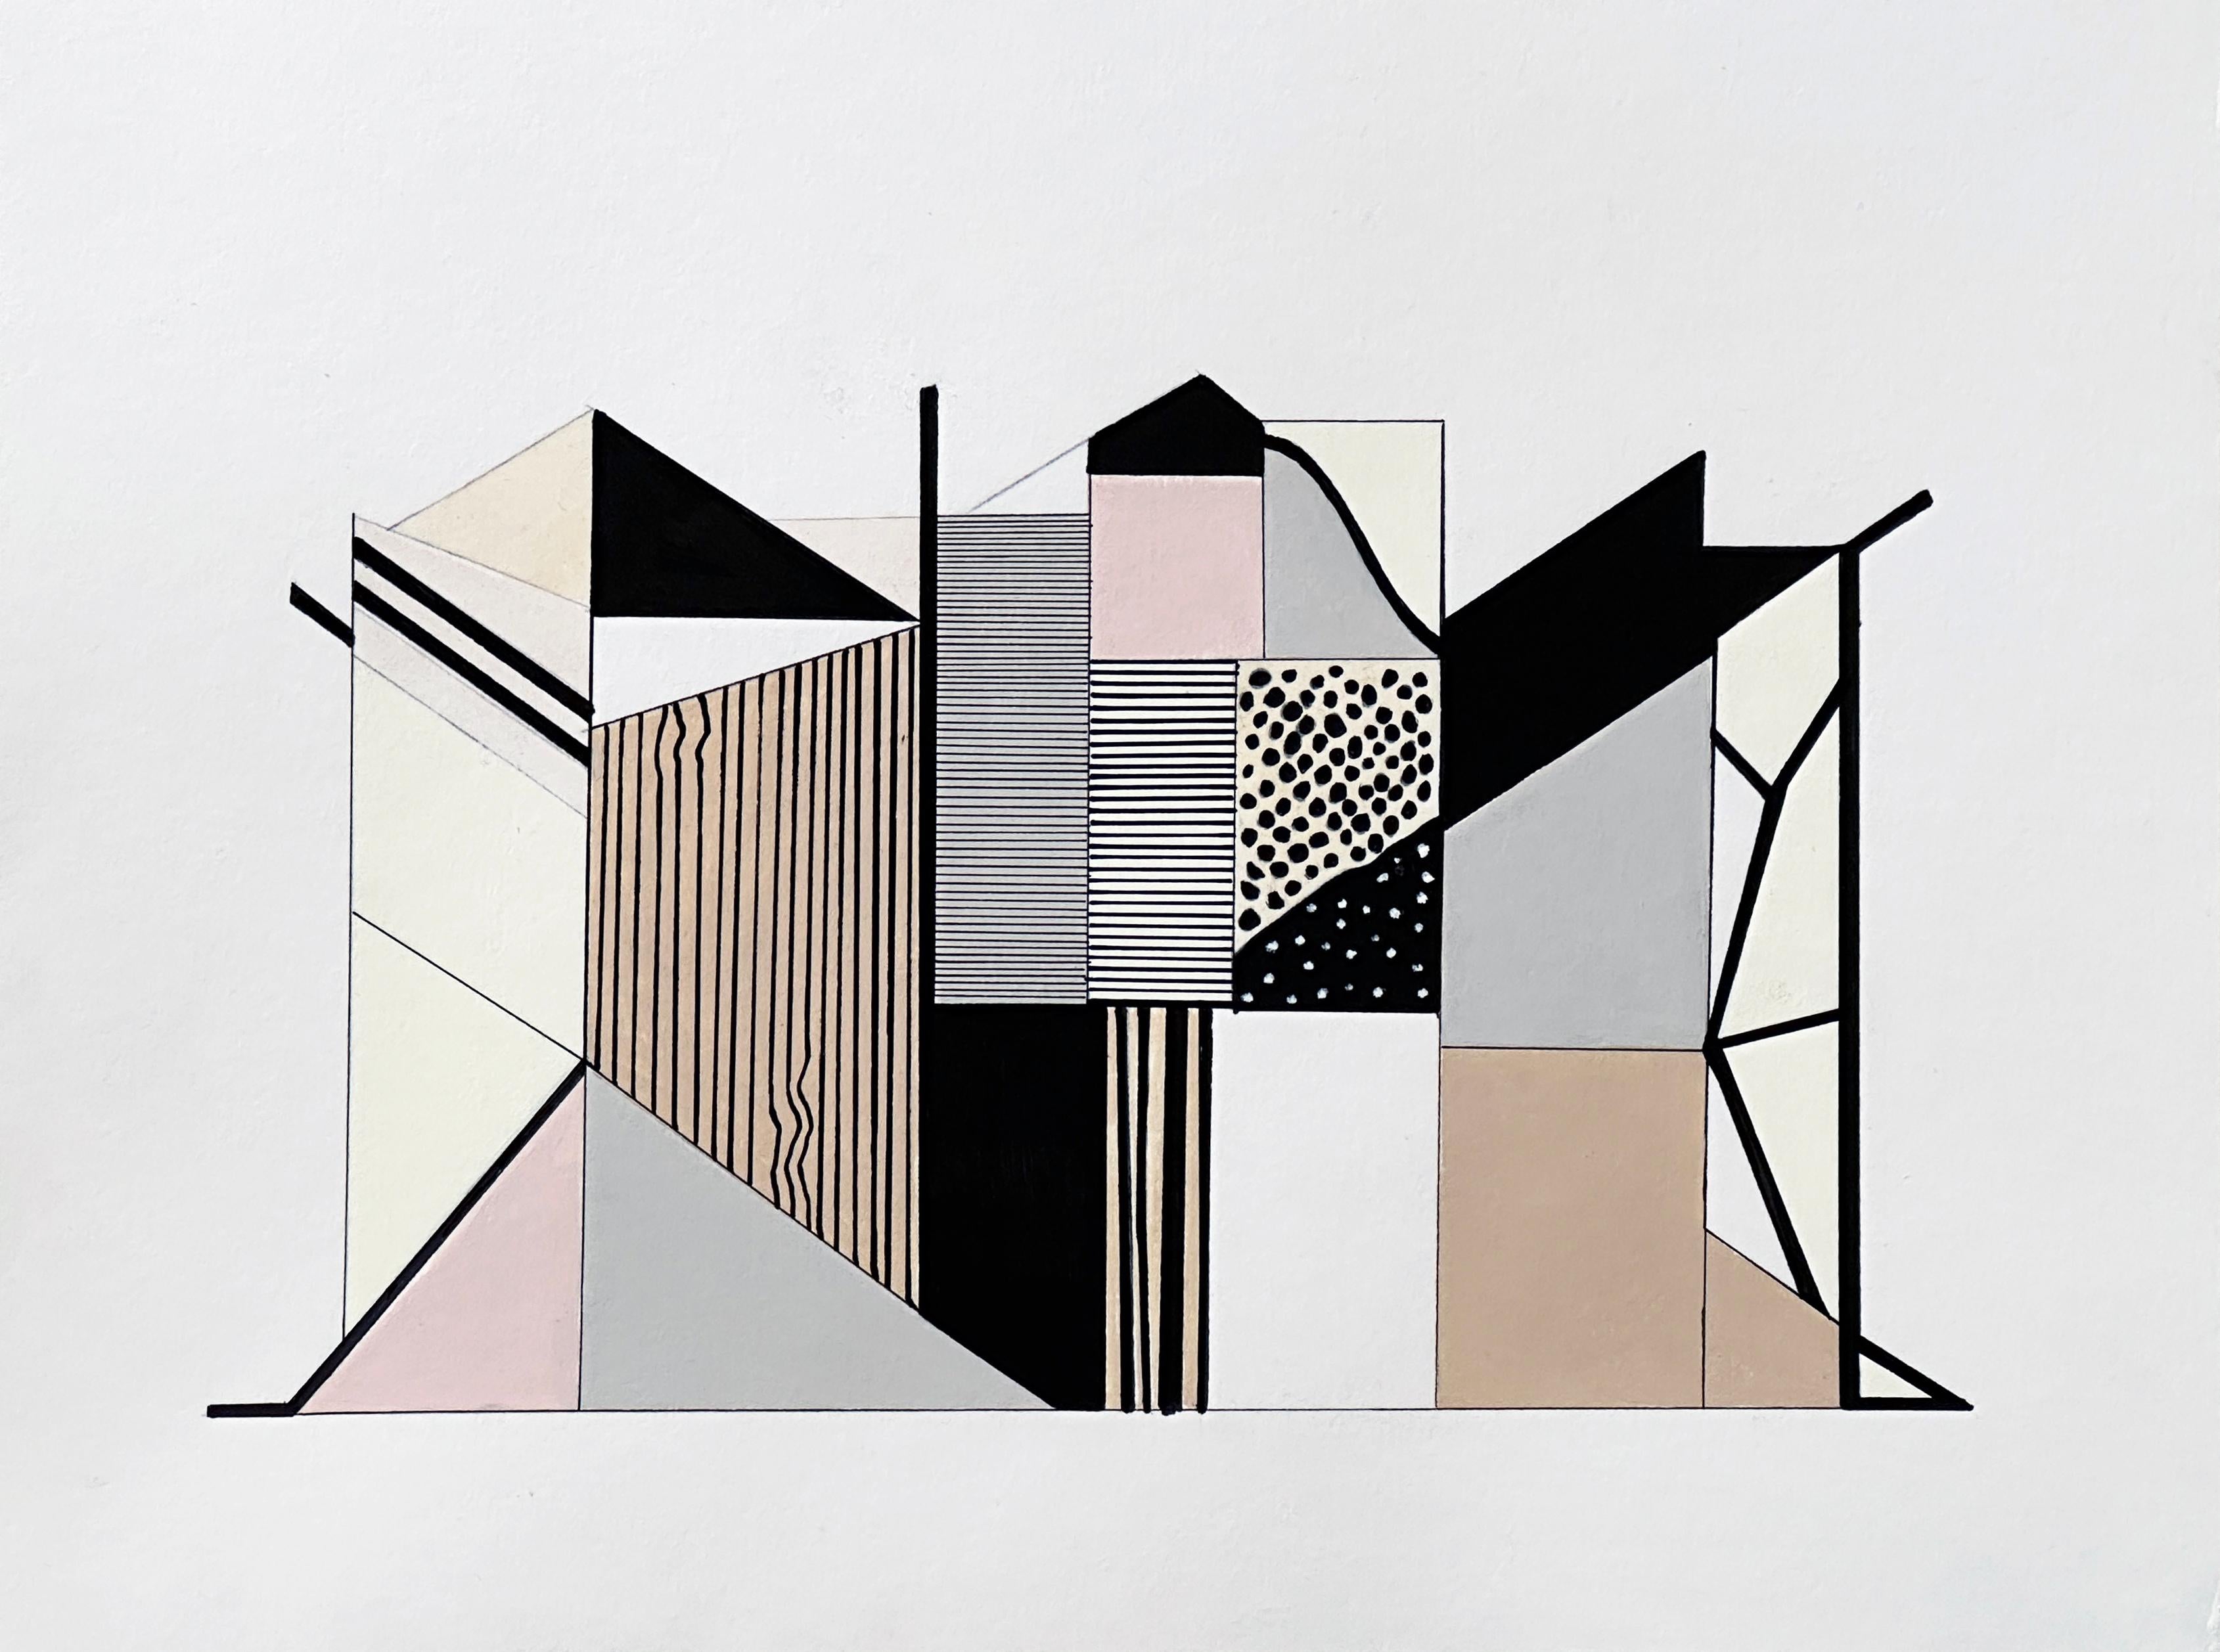 Amanda Andersen Abstract Painting - "Edifice I" contemporary drawing, abstract geometric, natural architecture